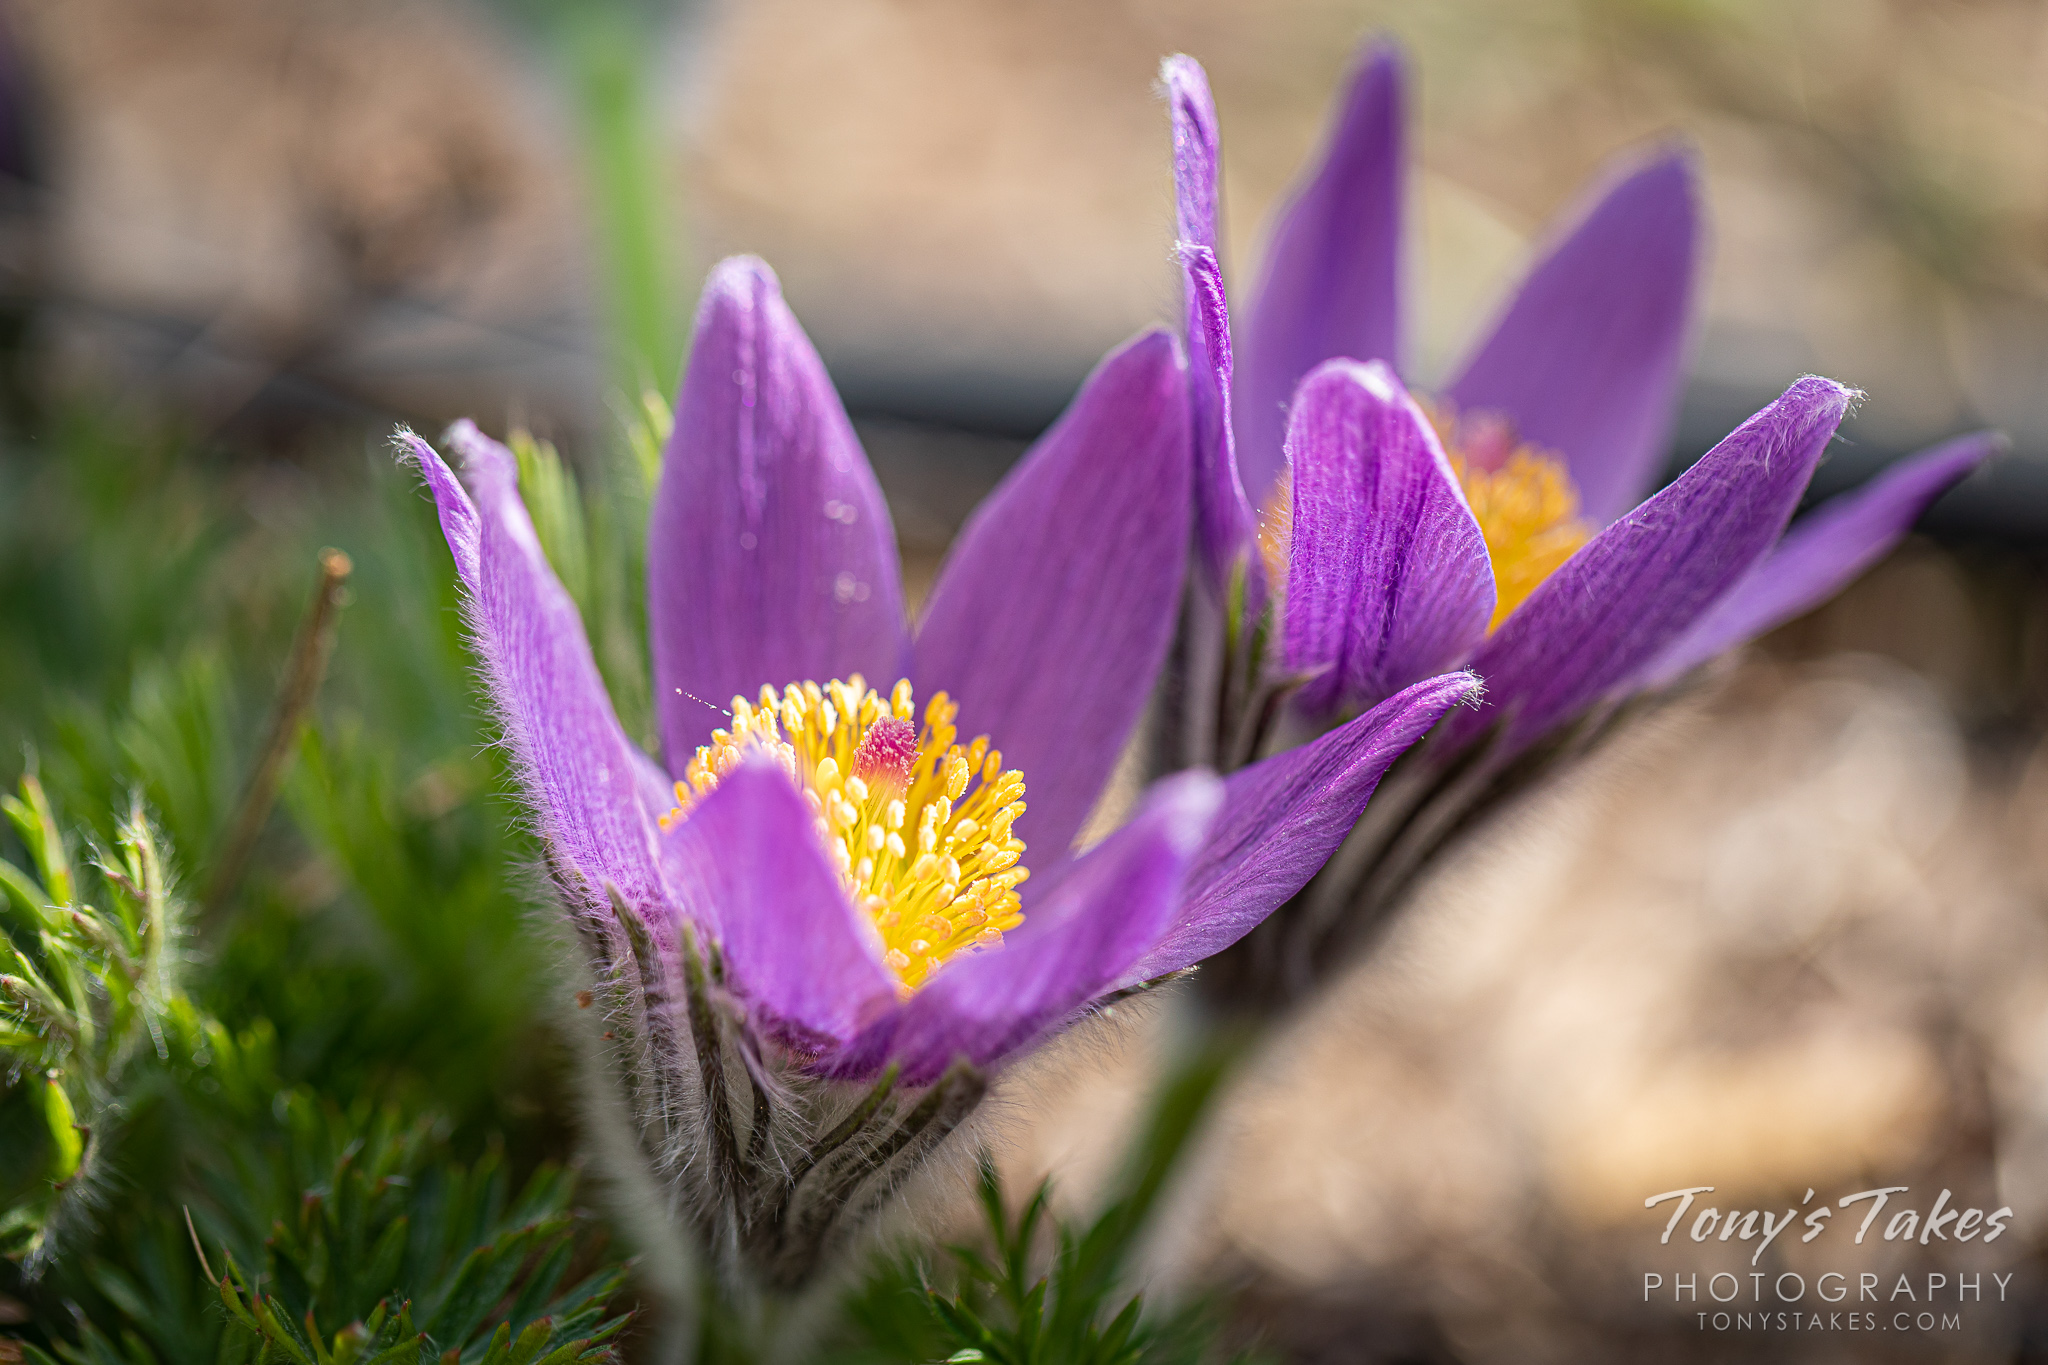 Springtime blooms | Tony's Takes Photography